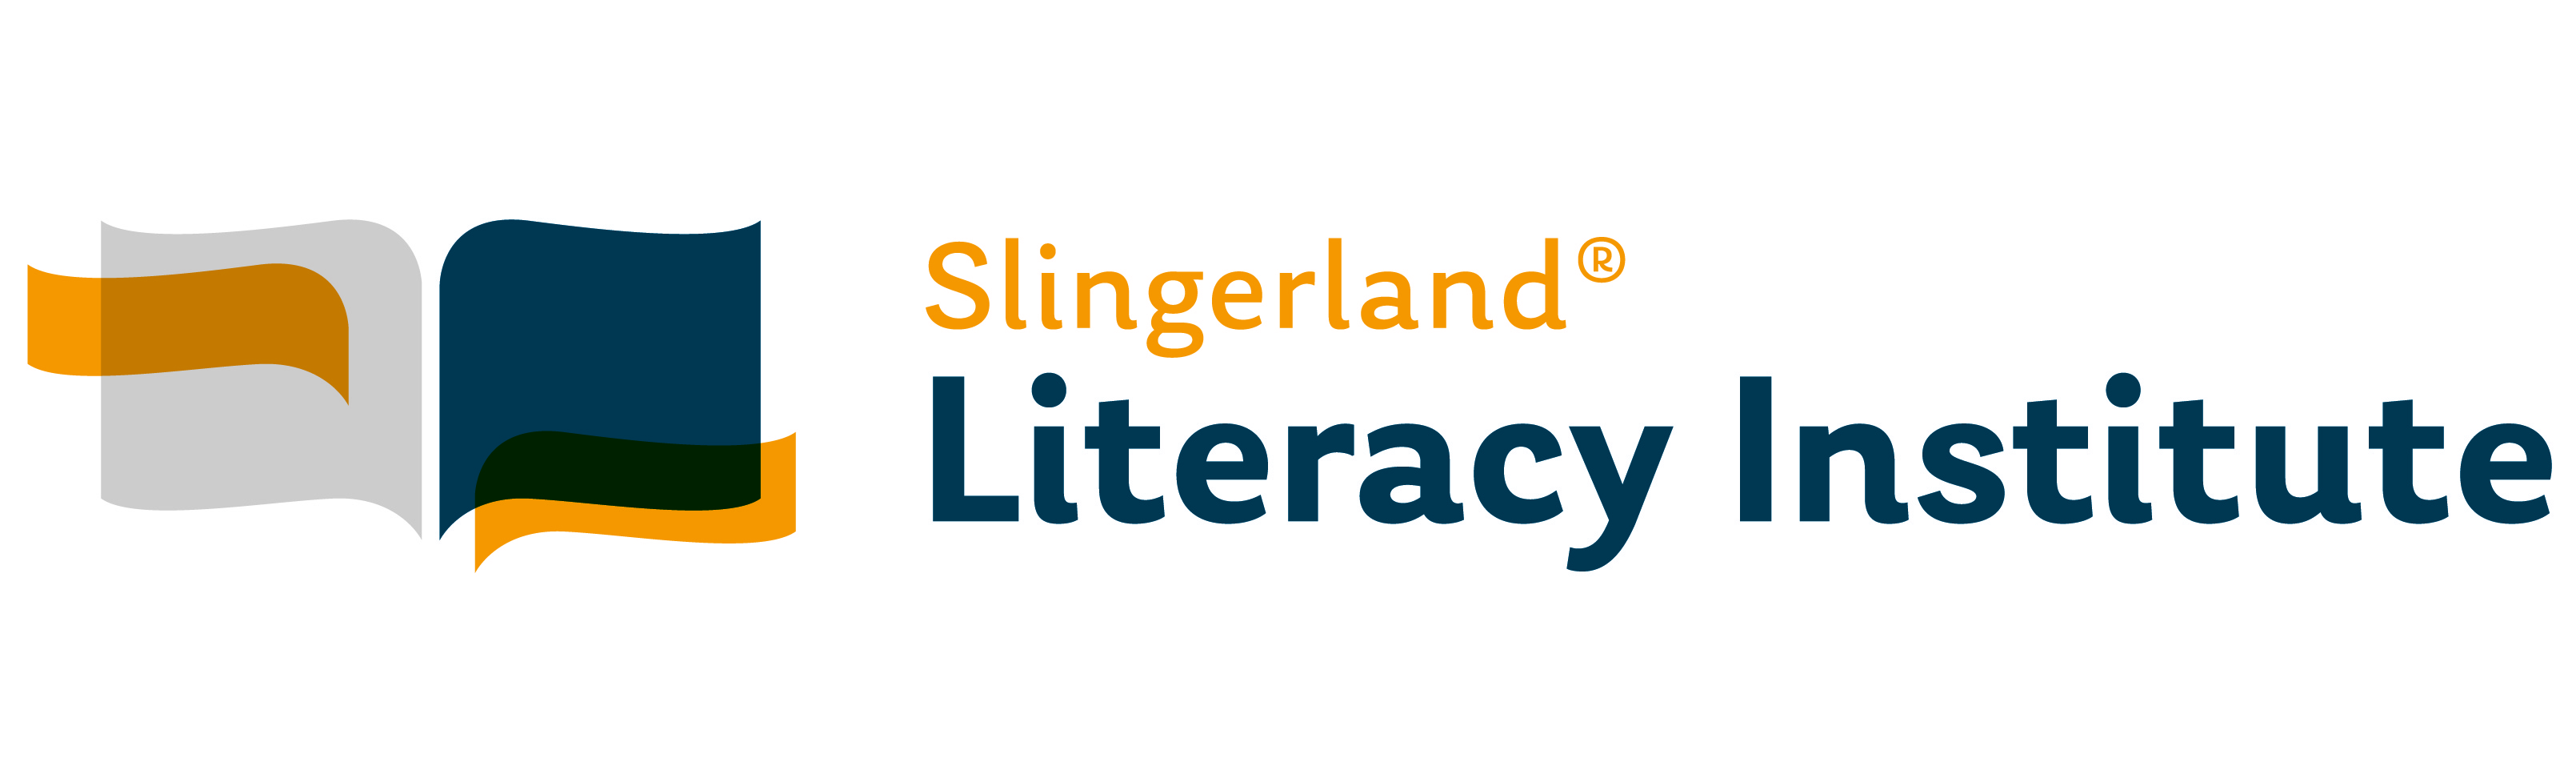 Slingerland Introductory / Third Level Comprehensive Classes at Valley Christian Schools: San Jose, Ca.